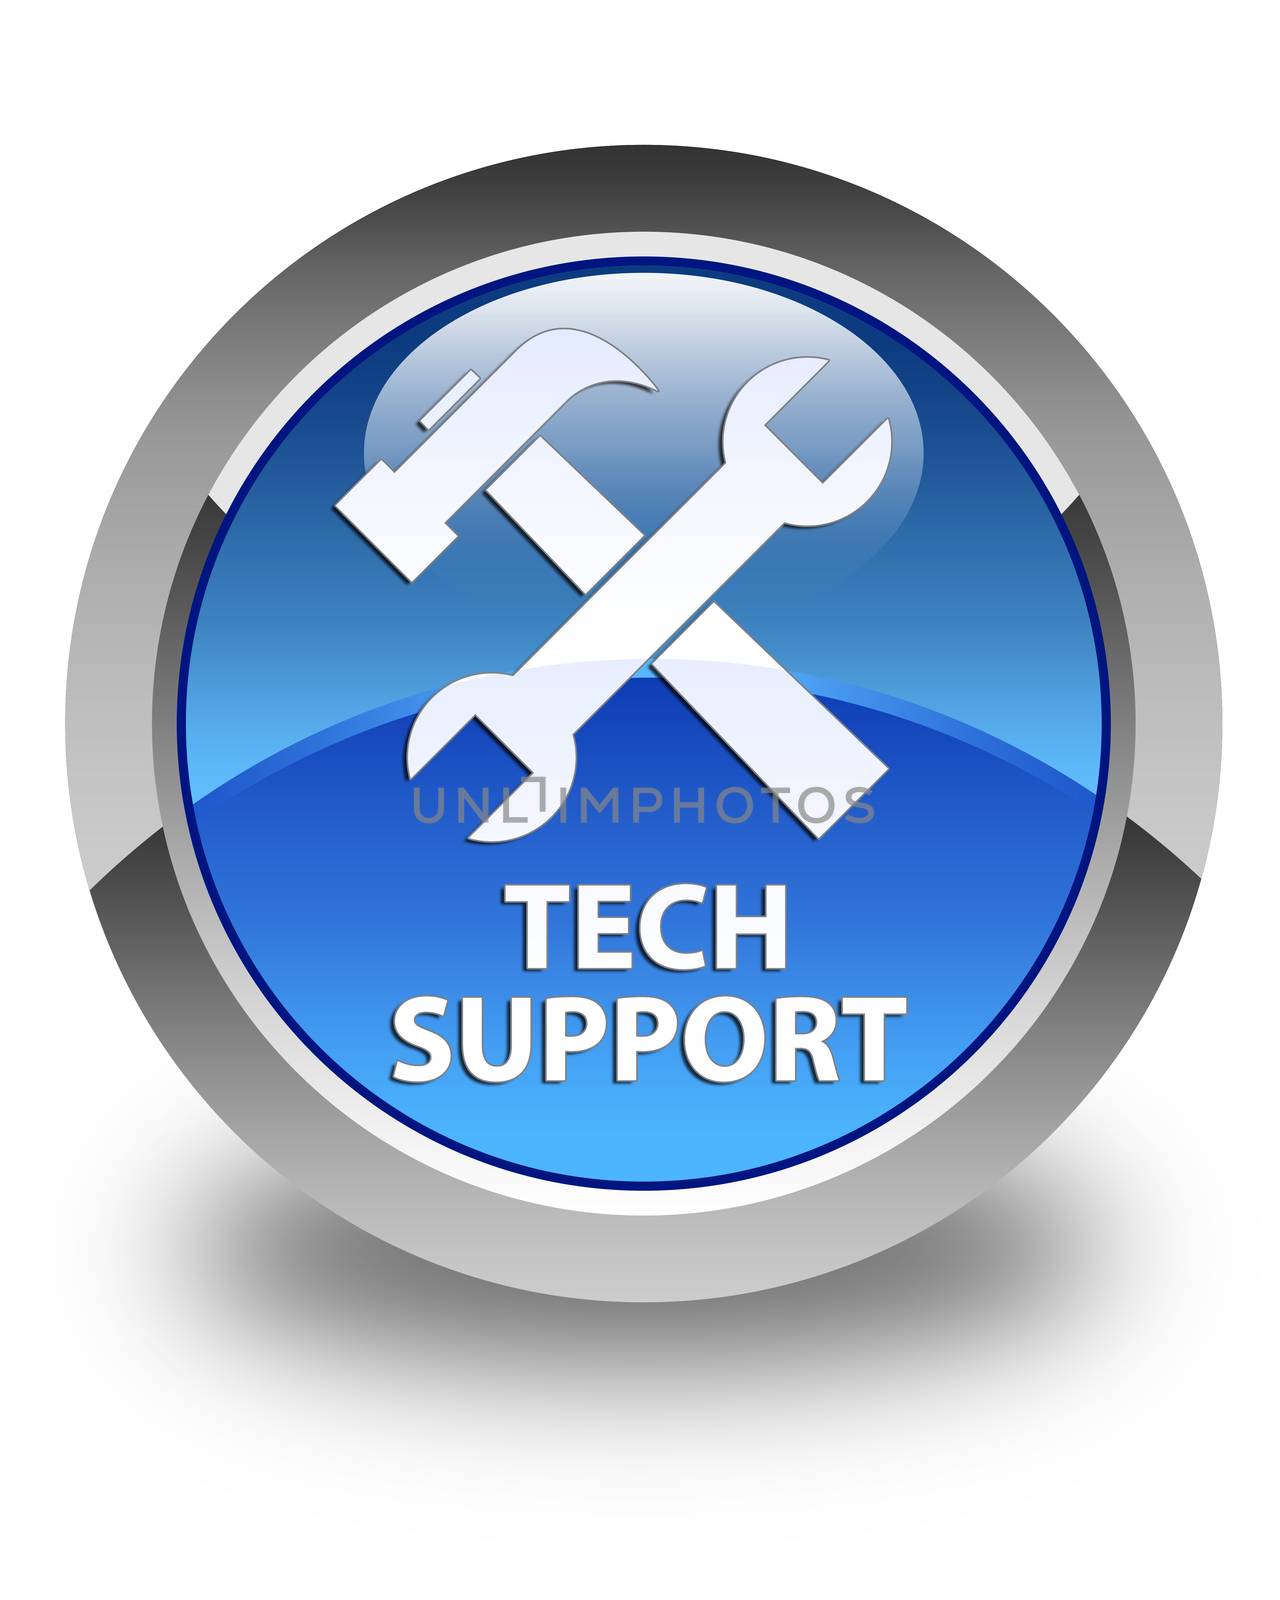 Tech support (tools icon) glossy blue round button